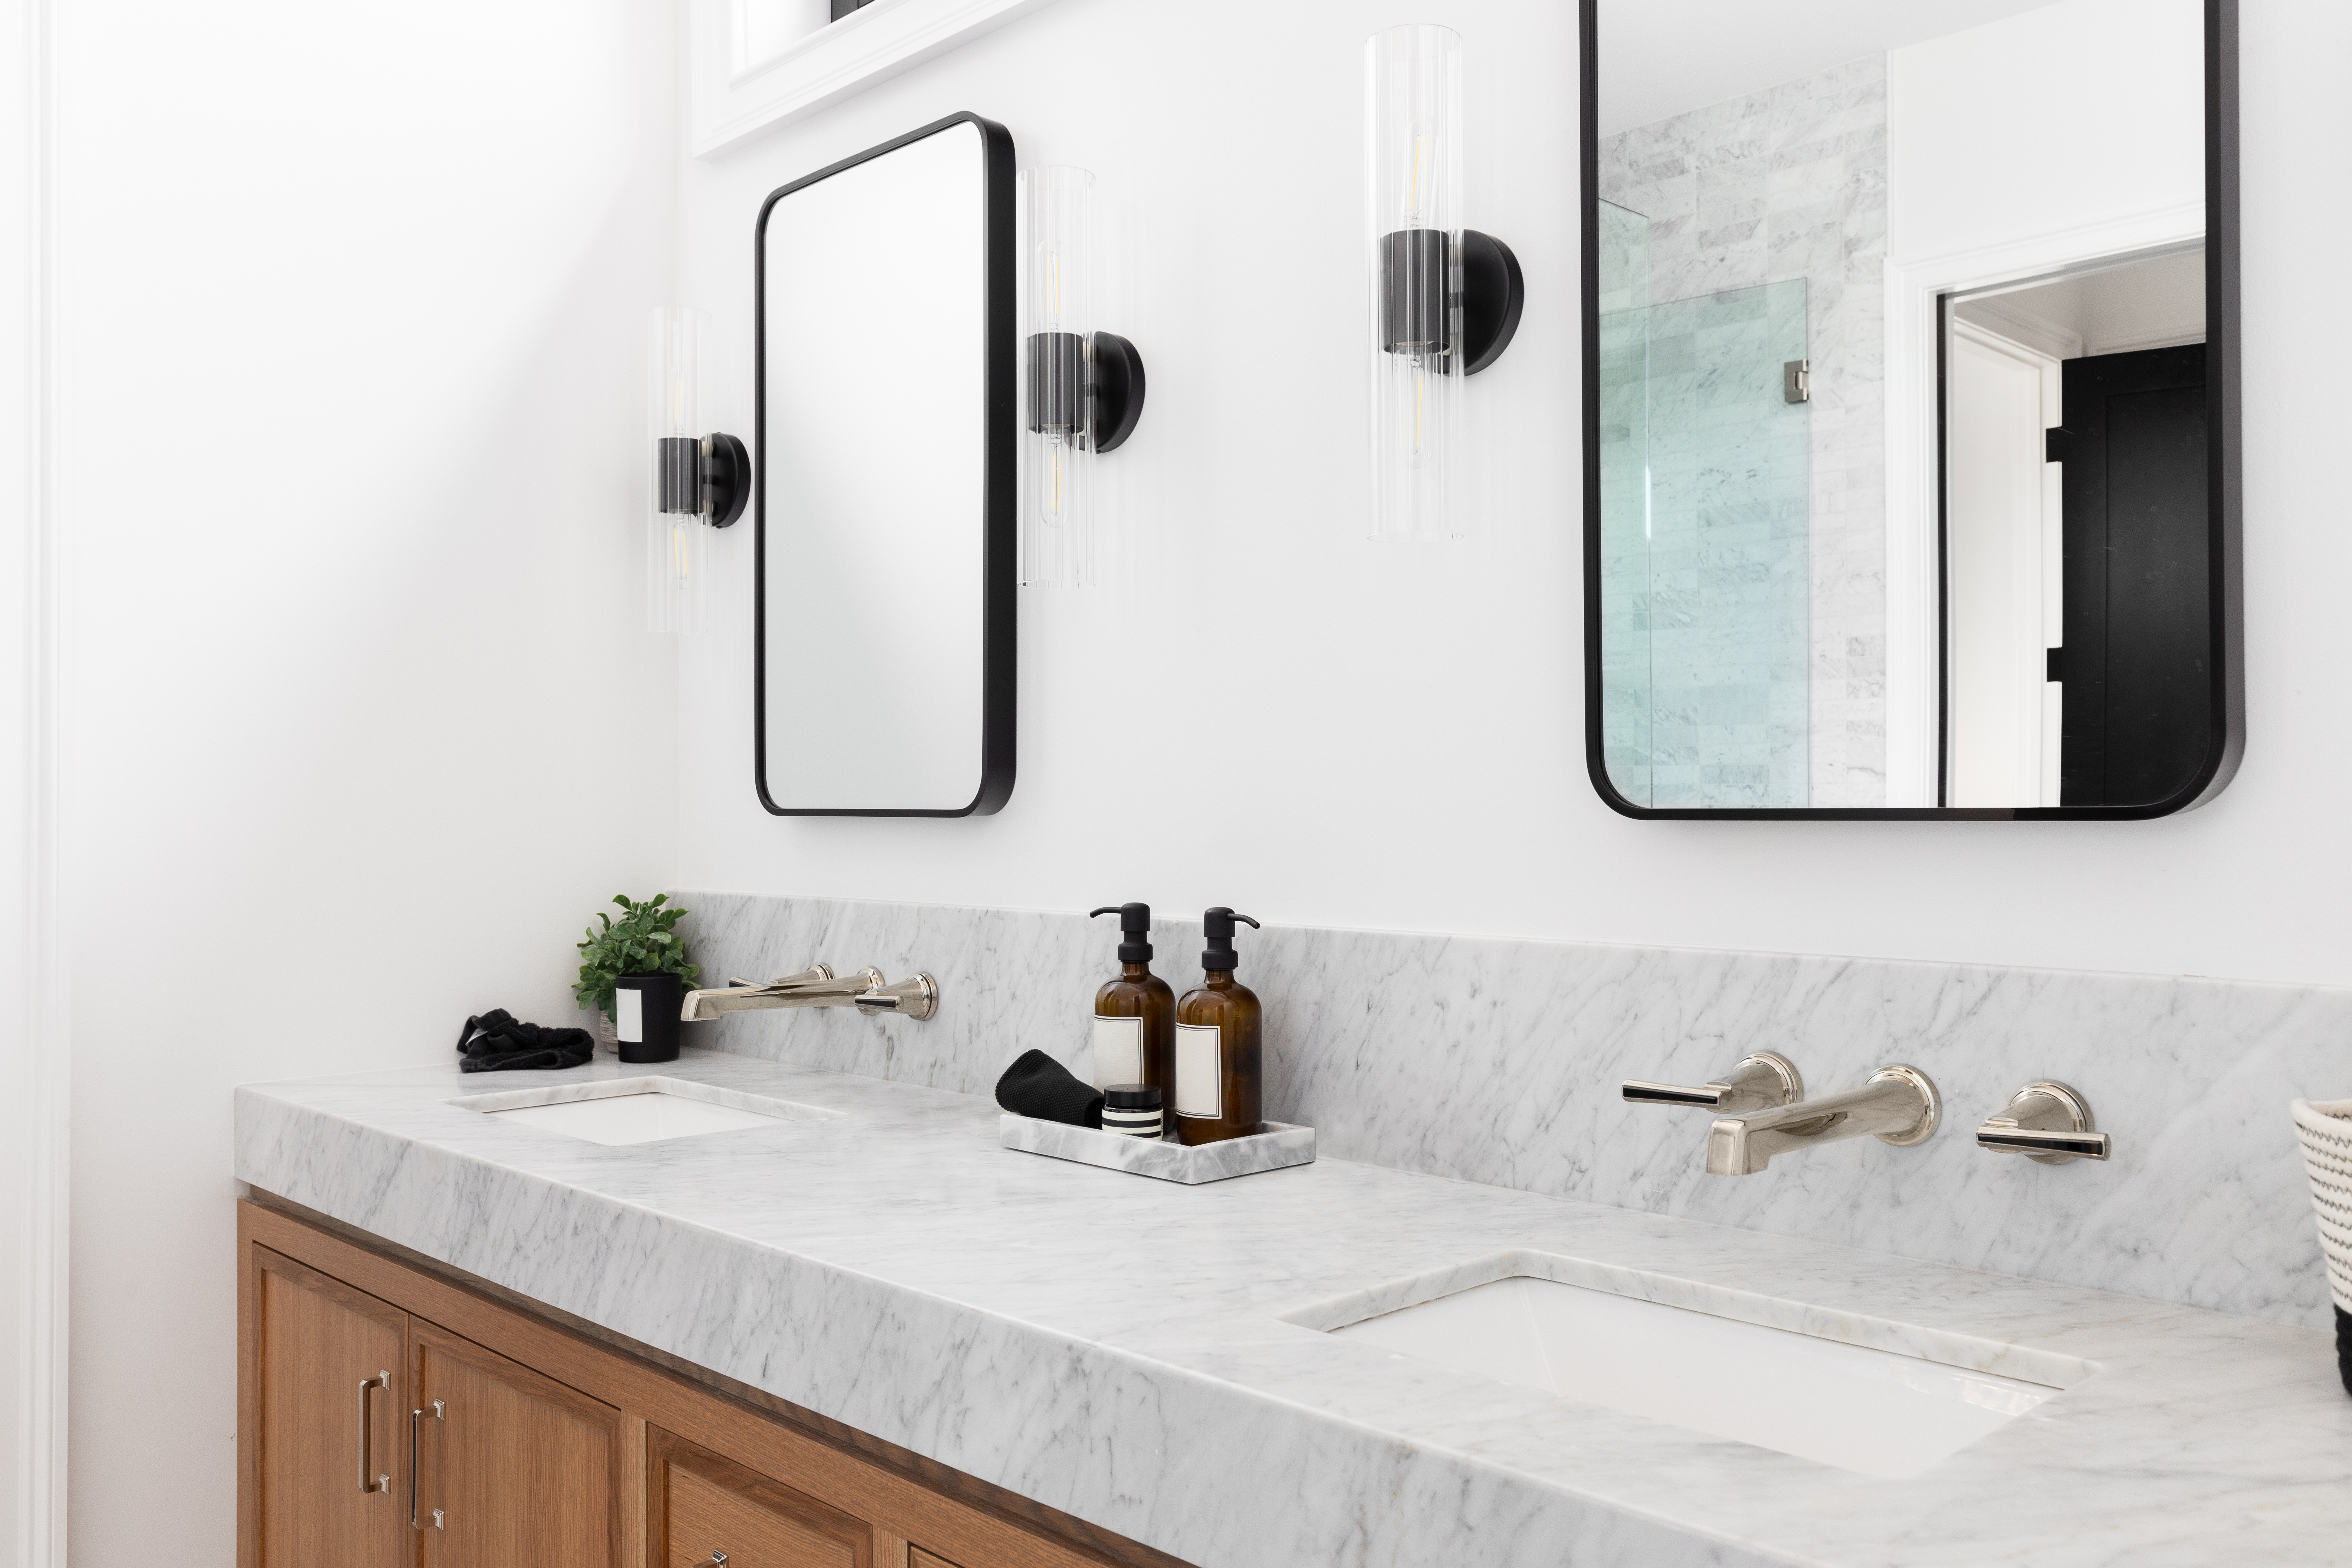 View Our Bathroom Remodeling Services